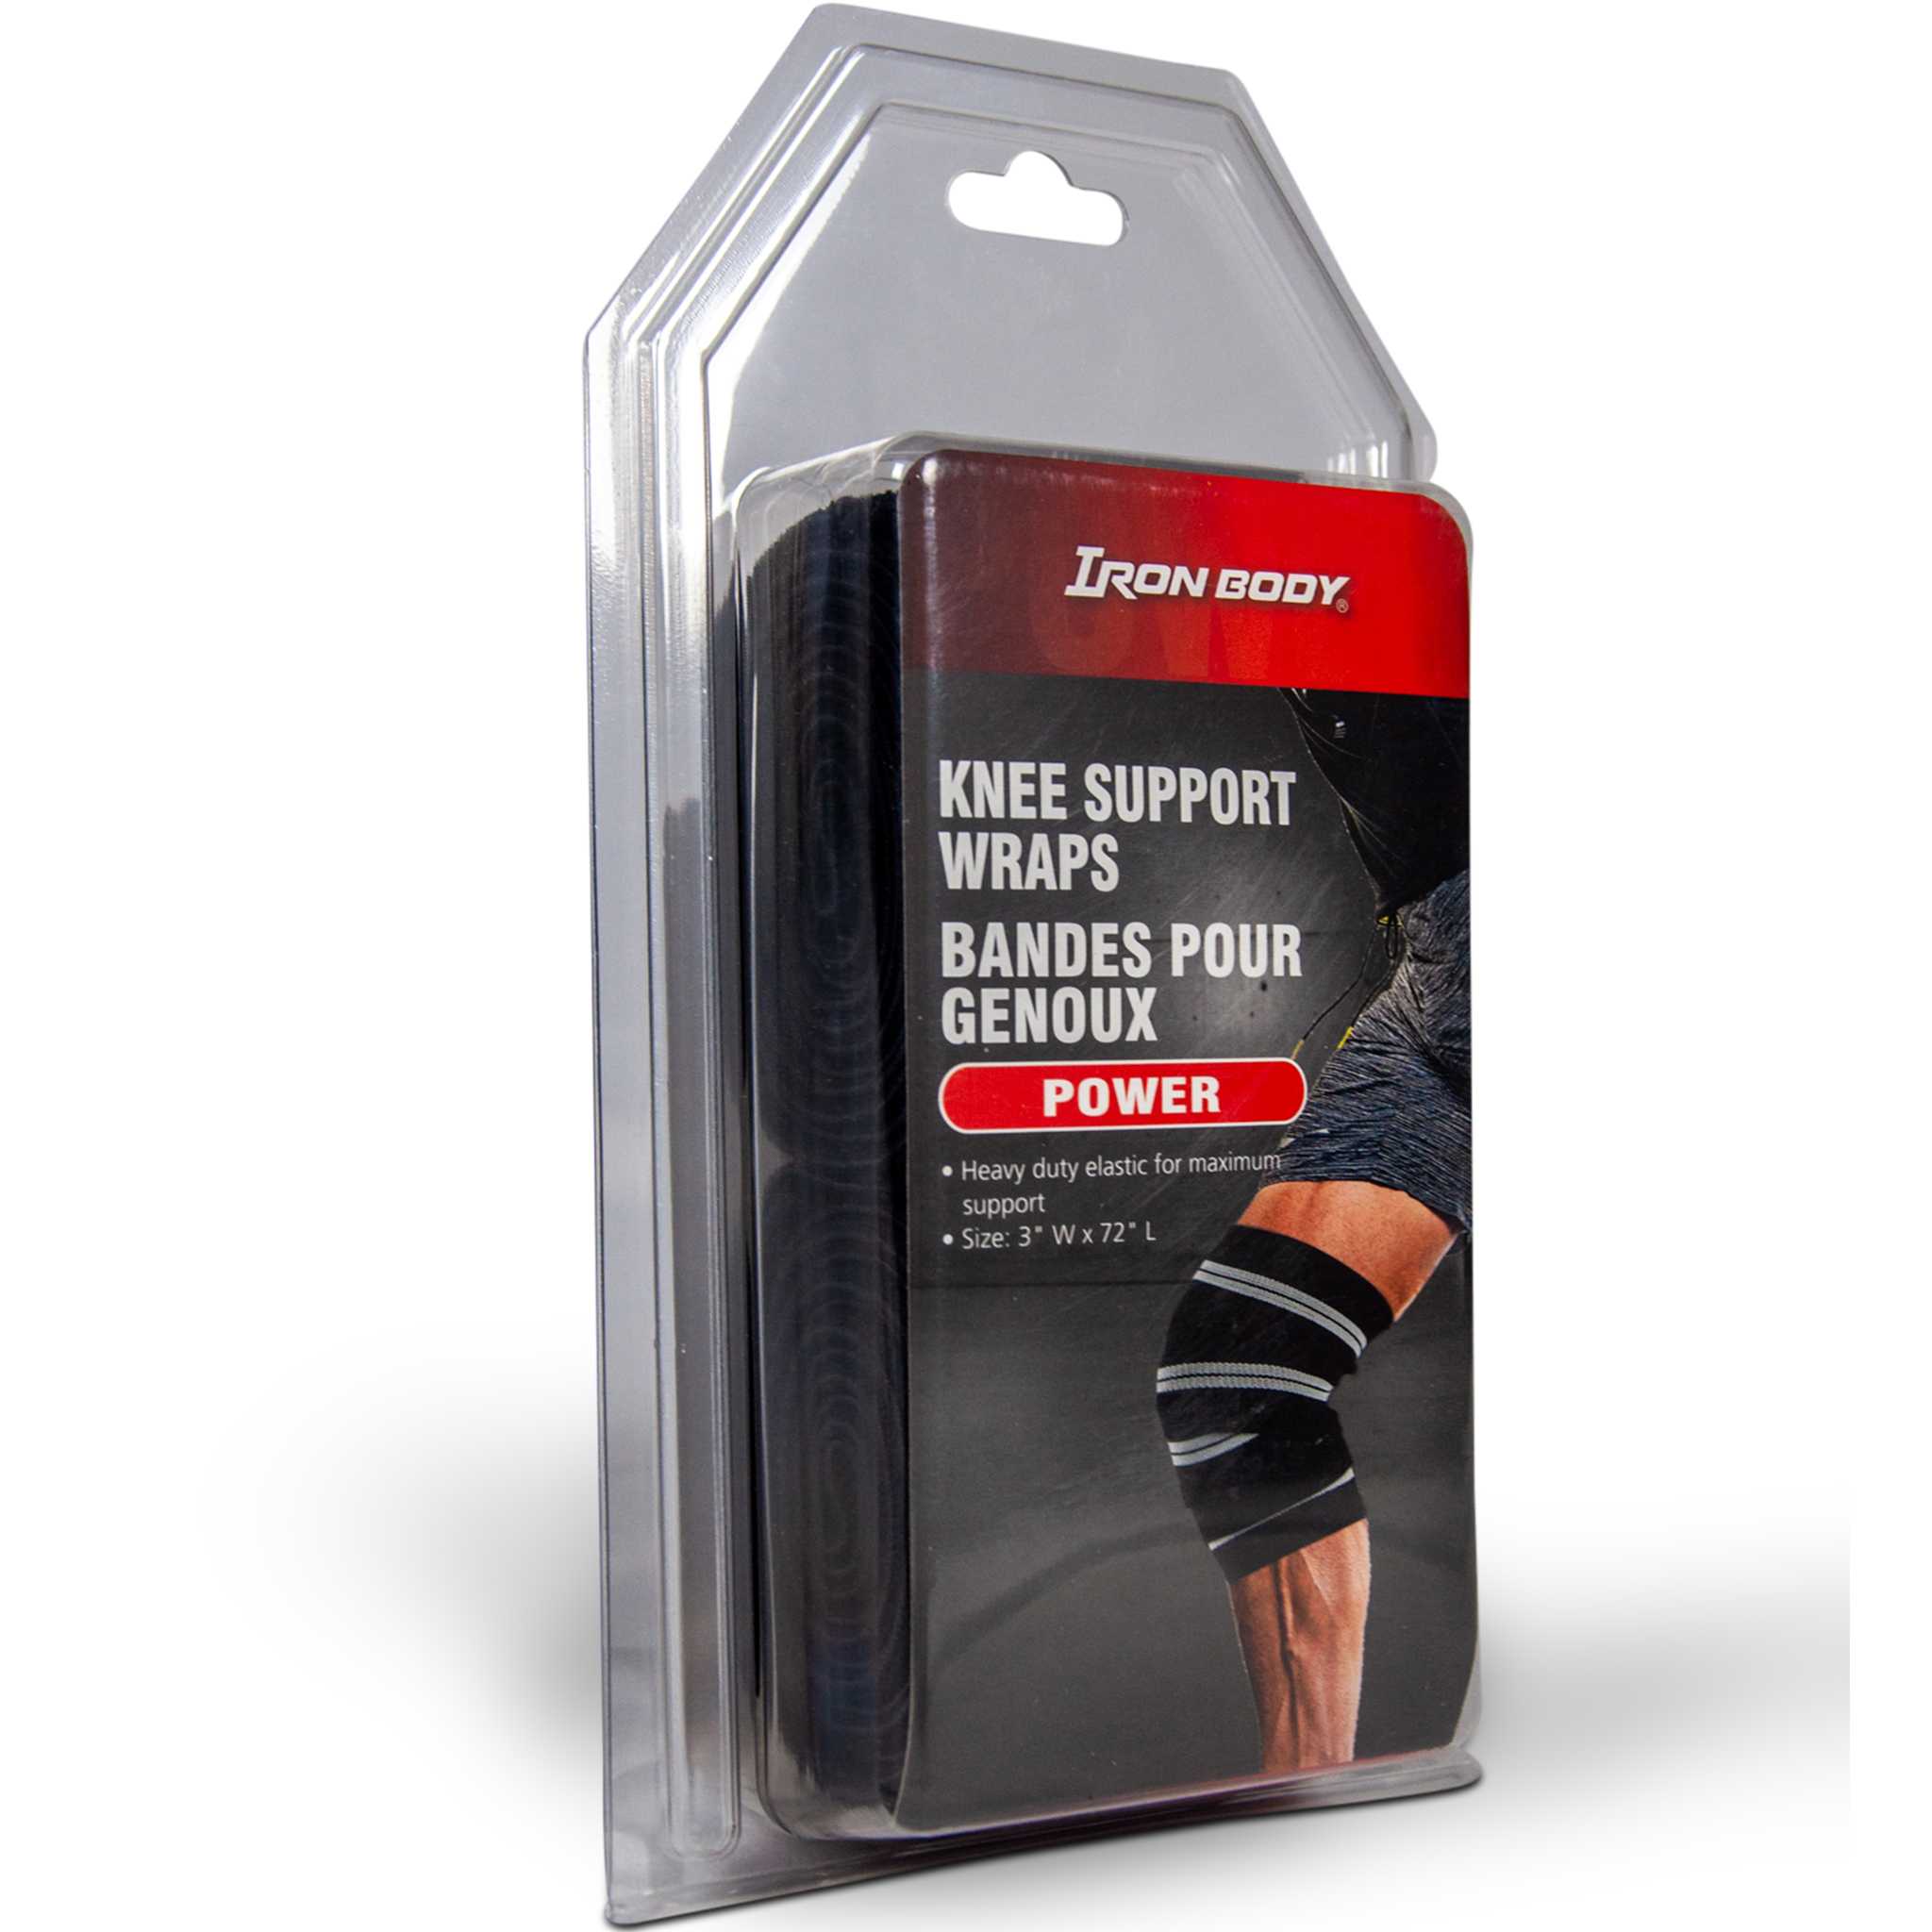 Knee Support Wraps